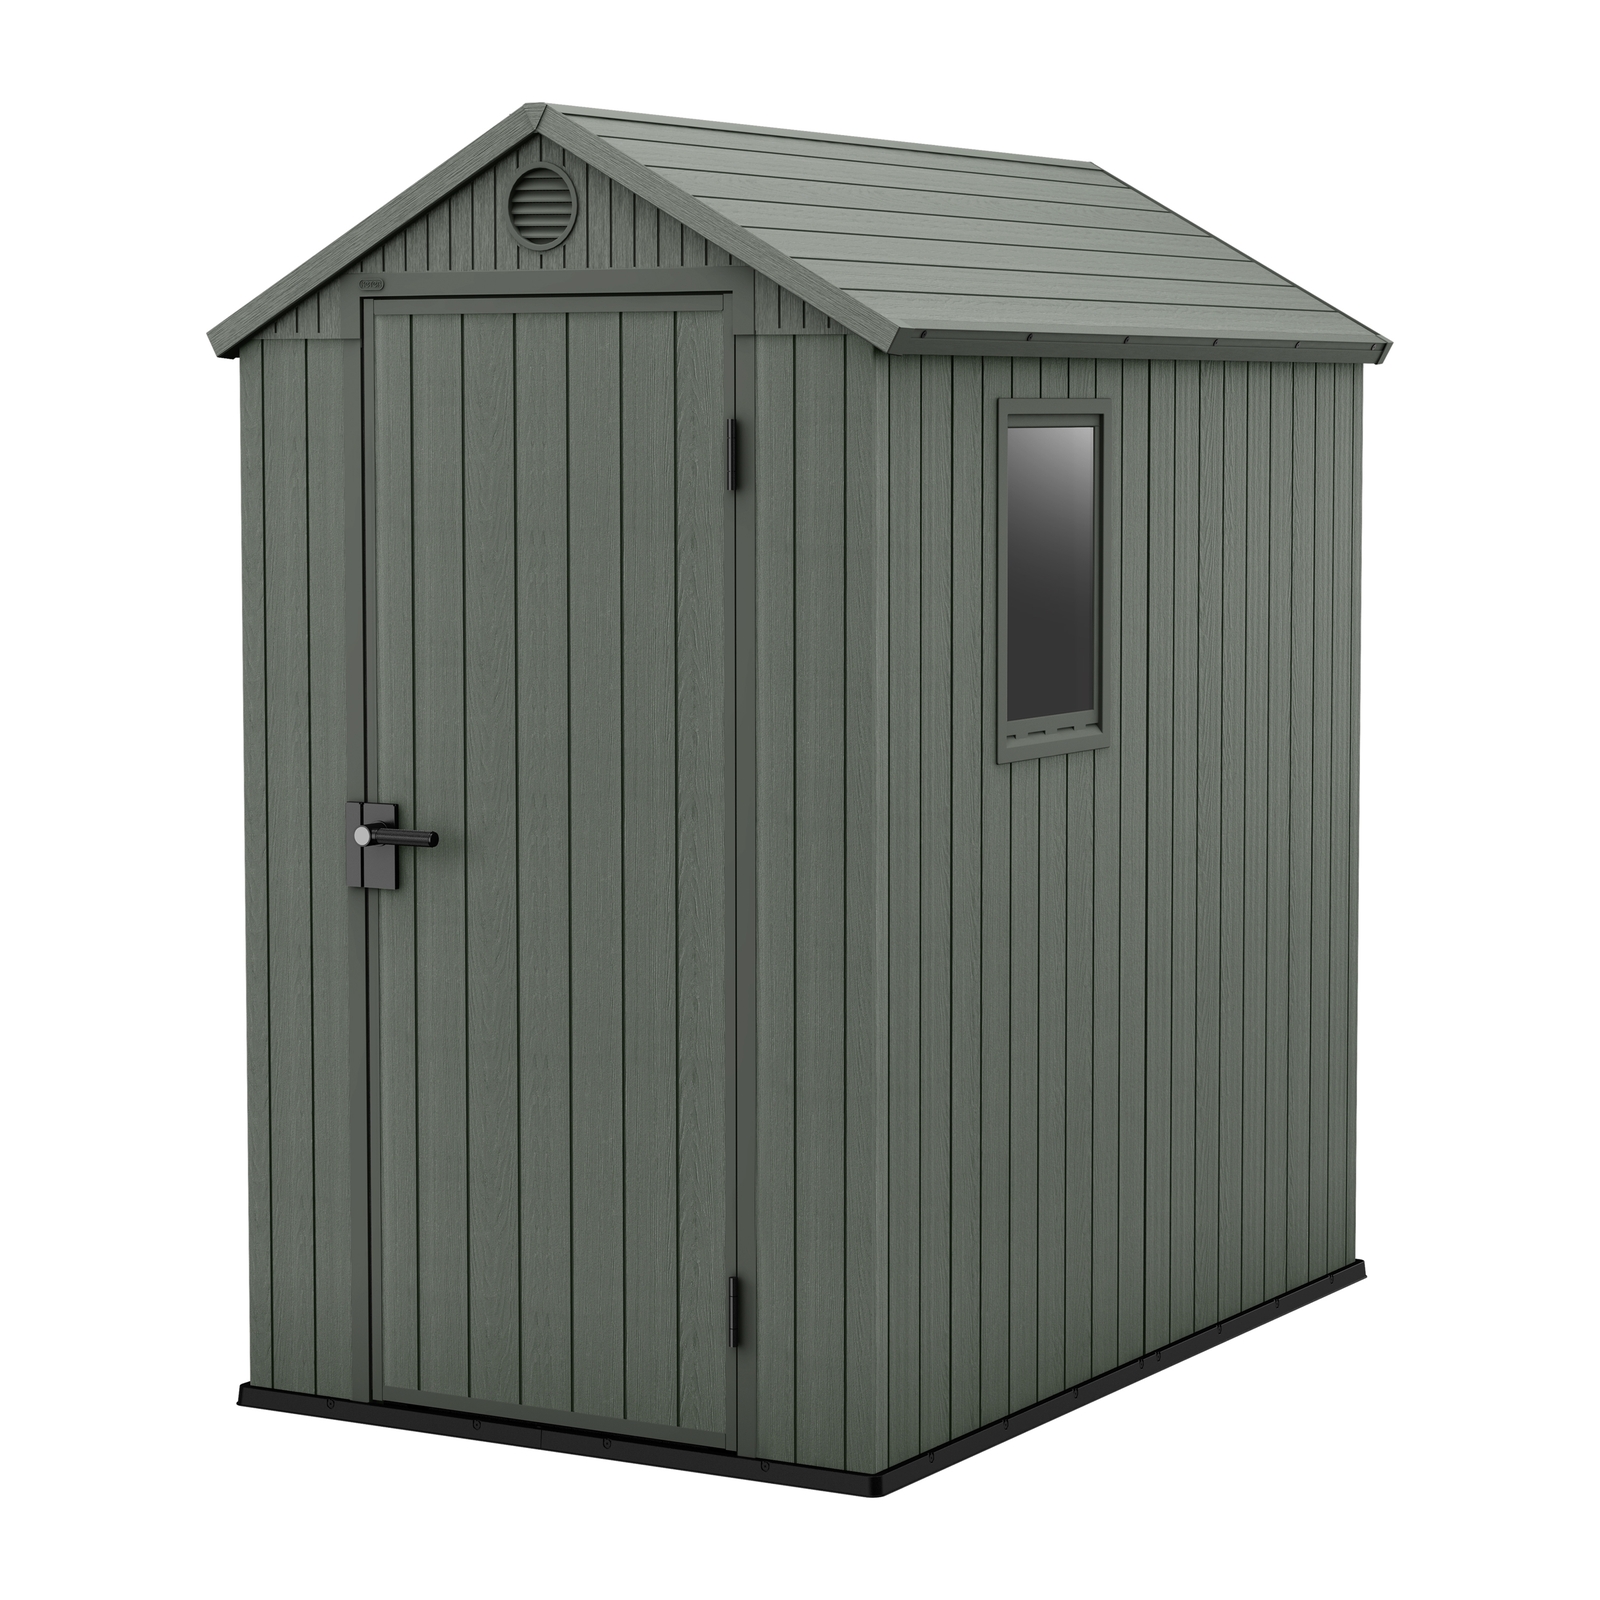 Keter Darwin 4x6 Apex Outdoor Storage Shed - Green